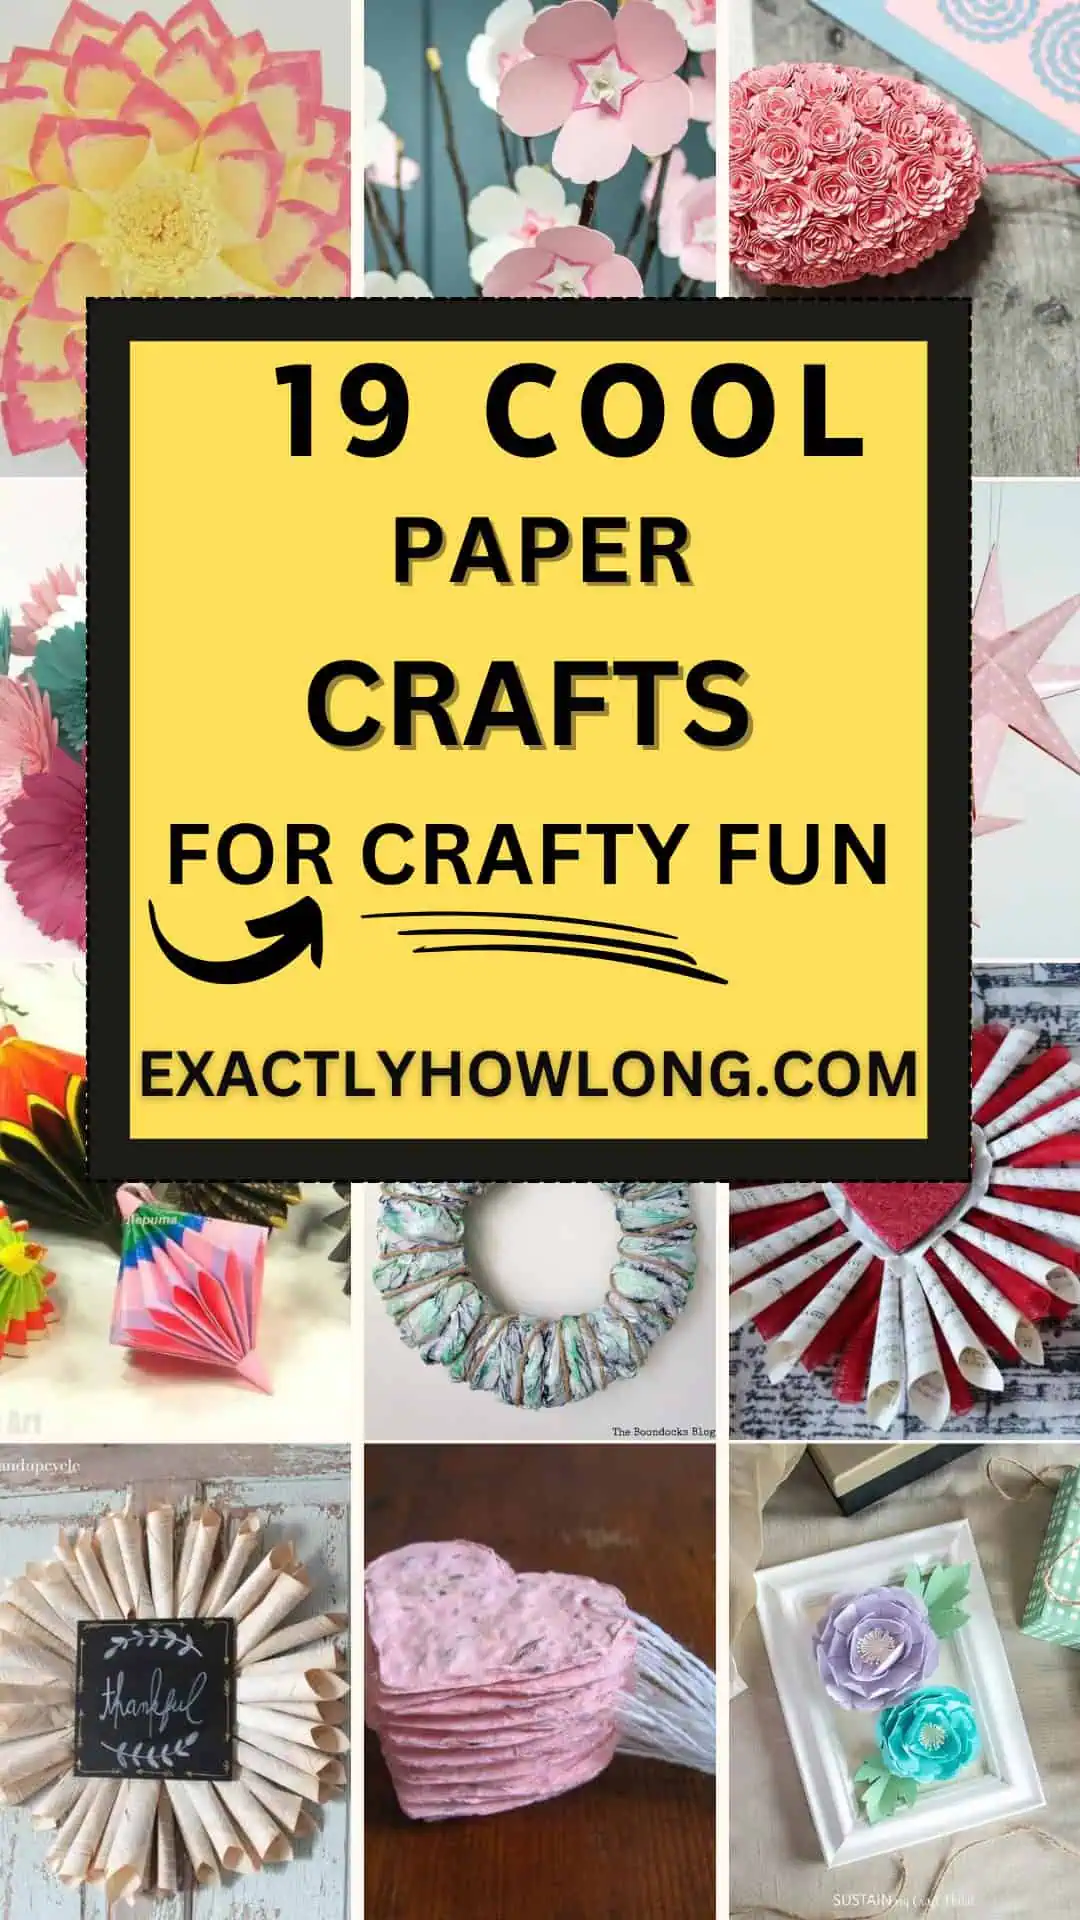 Kids and teens can easily create cool paper crafts with these step-by-step DIY instructions